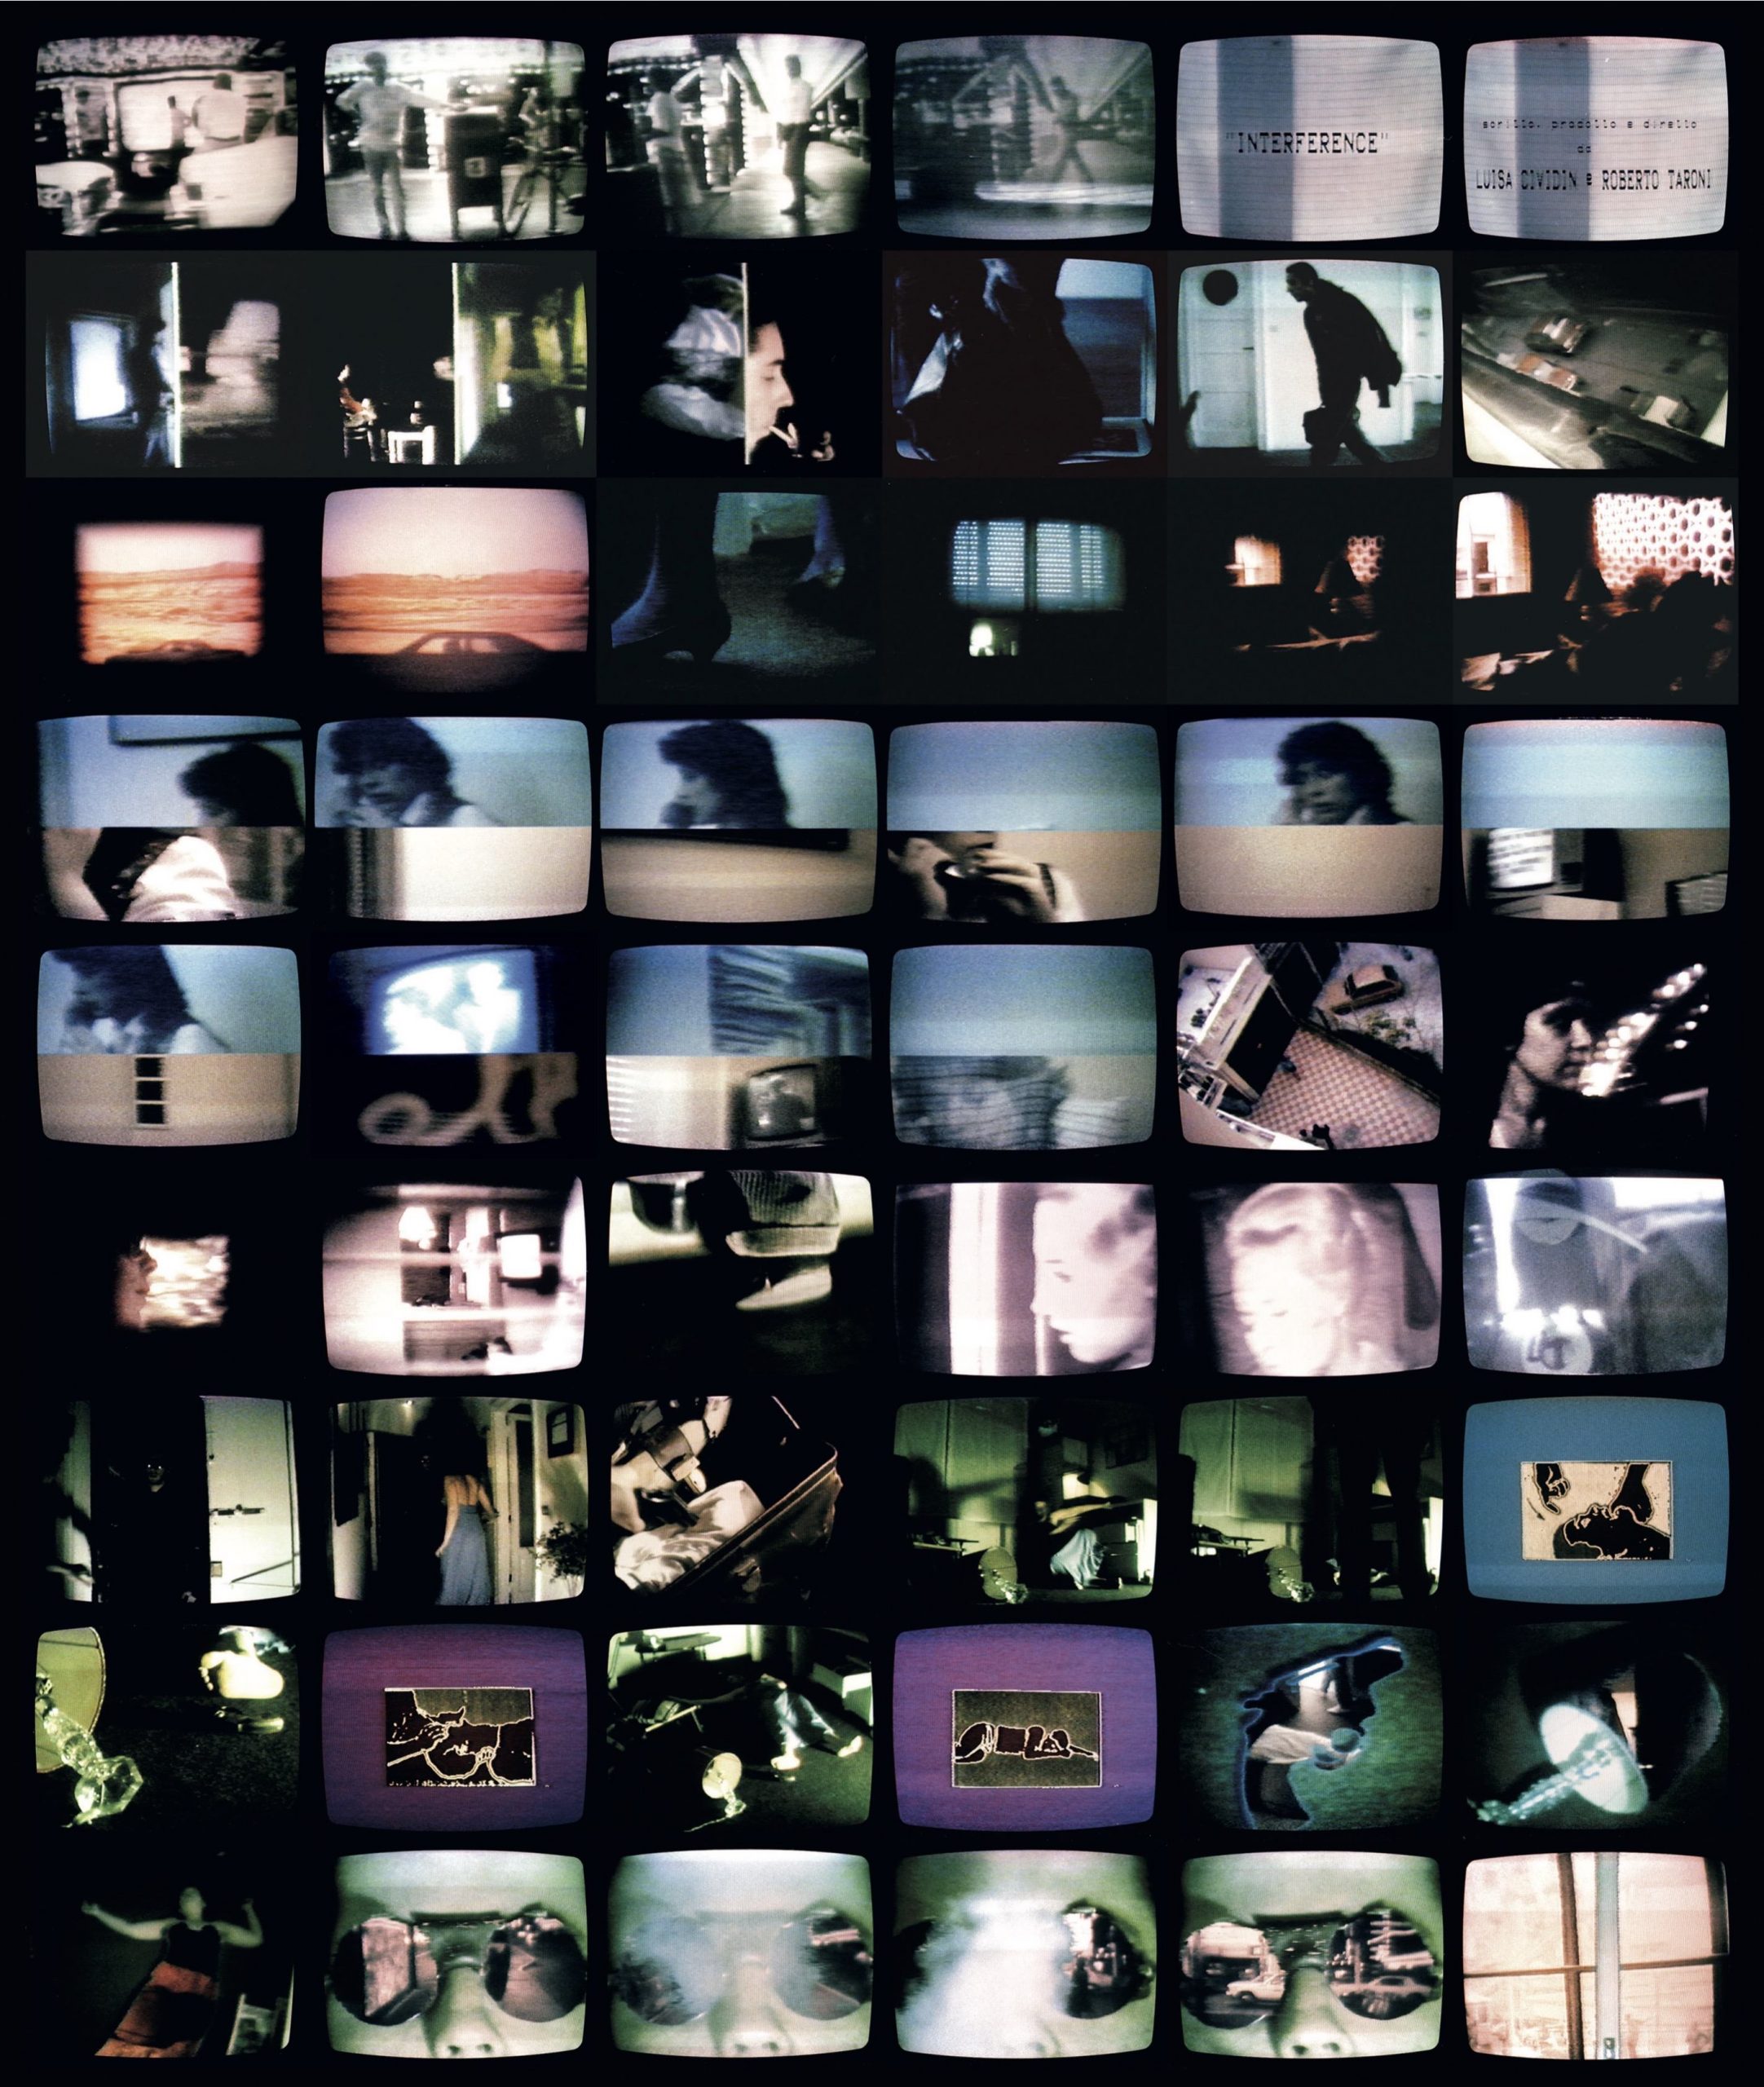 Photo of 54 tv screens, forming a 9x6 grid. The images on the tv screens depict among others: variations of blurry sepia portraits, variations of a close up of someone wearing sunglasses, the shadow of a car driving on a highway, fragmented human figures in split screens. The main colours are blue, green, black and purple.